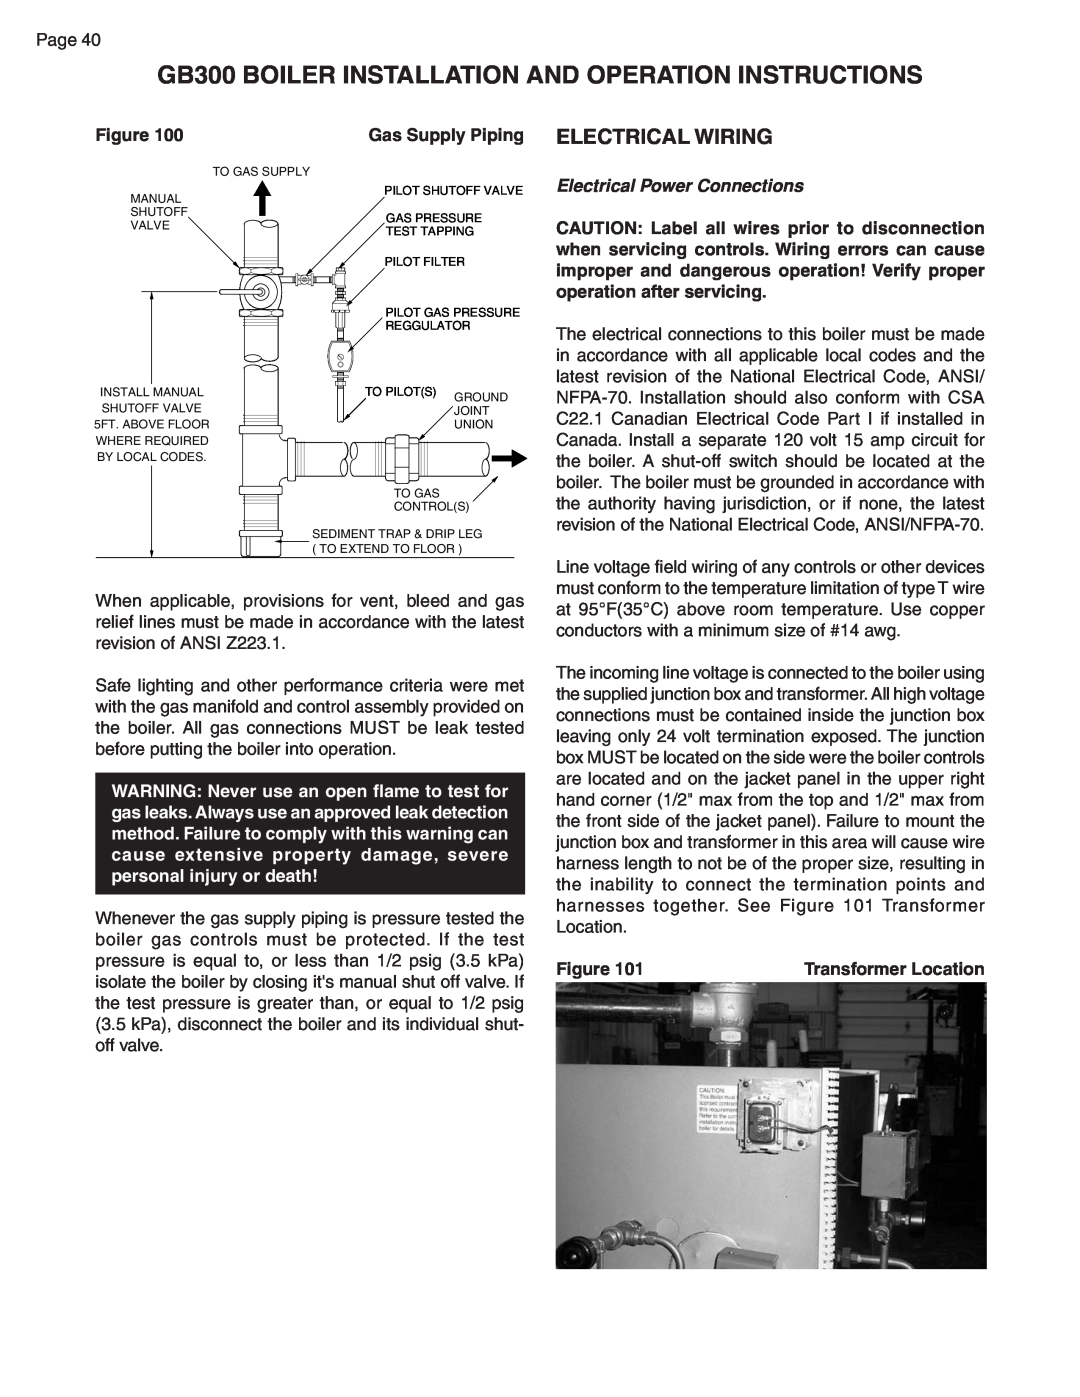 Smith Cast Iron Boilers GB300 warranty Figure, Gas Supply Piping, Electrical Power Connections, Transformer Location 